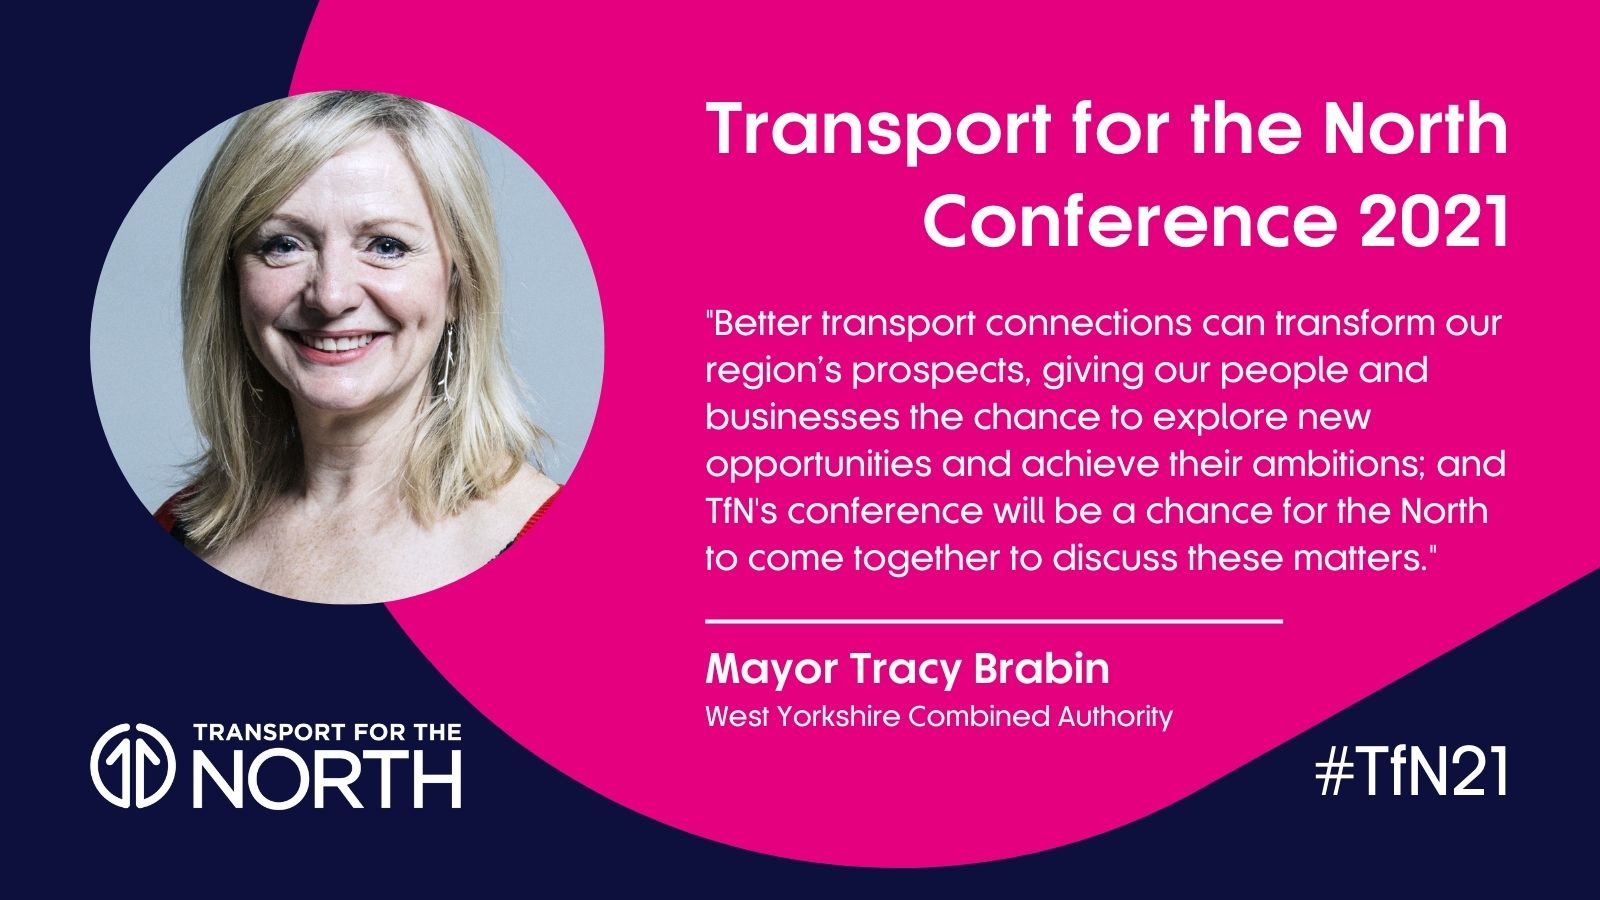 Tracy Brabin speaker quote ahead of Transport for the North annual conference 2021